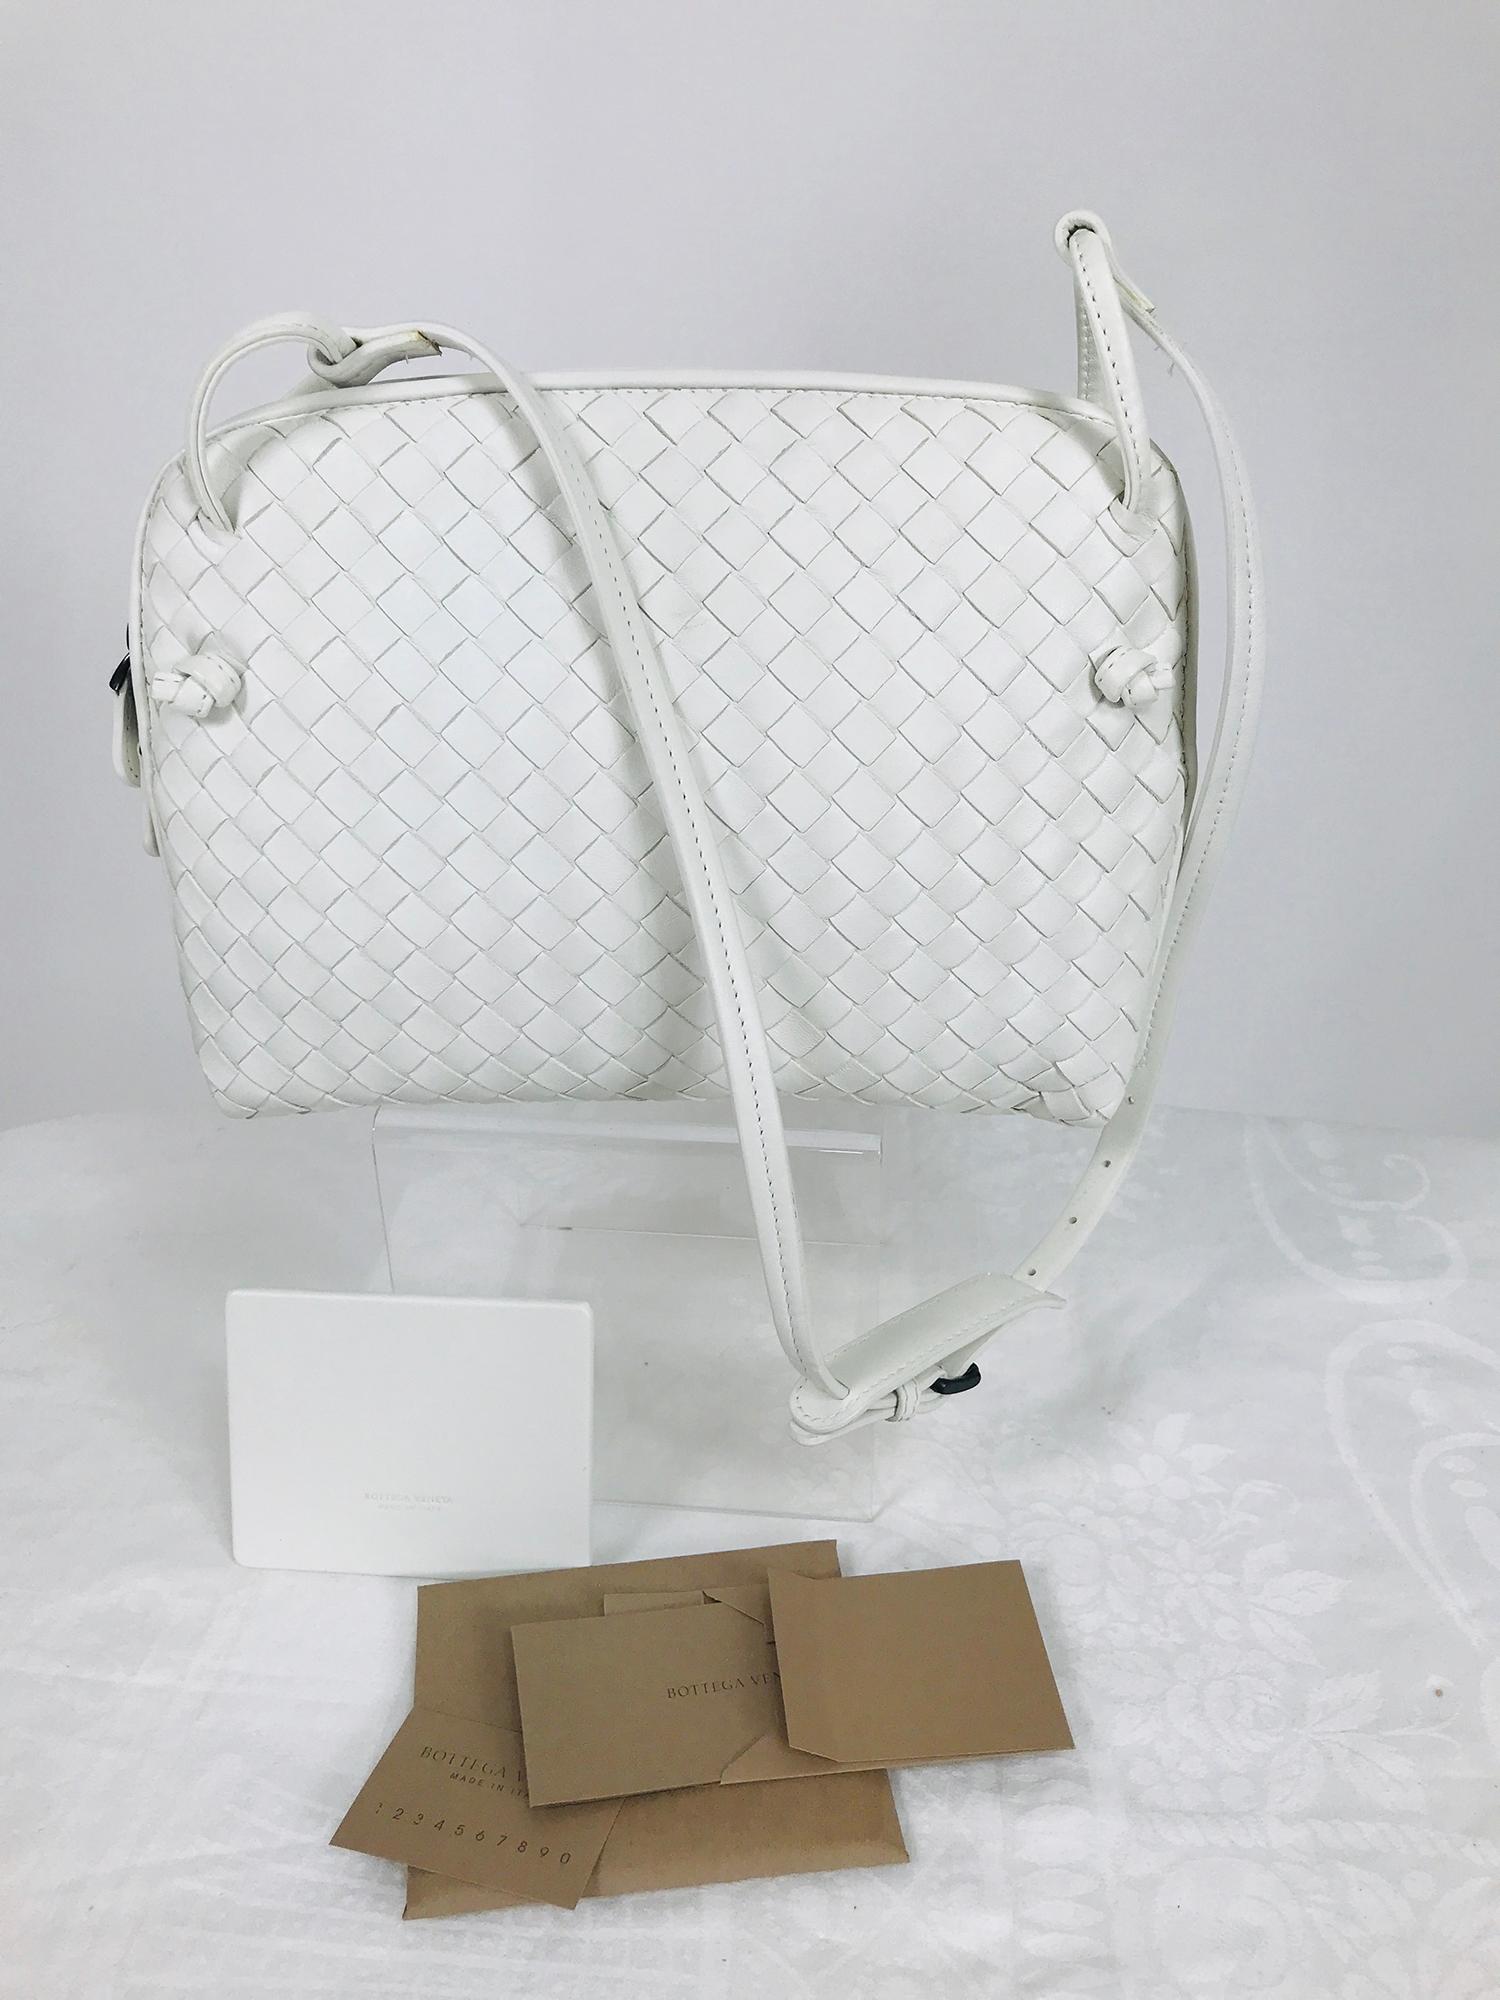 Bottega Veneta white intrecciato Nappa leather shoulder bag from 2016. This bag looks unworn. We have sold a number of Bottega Veneta bags from this customer who dated everything from the day it was purchased, including tags and price! She paid